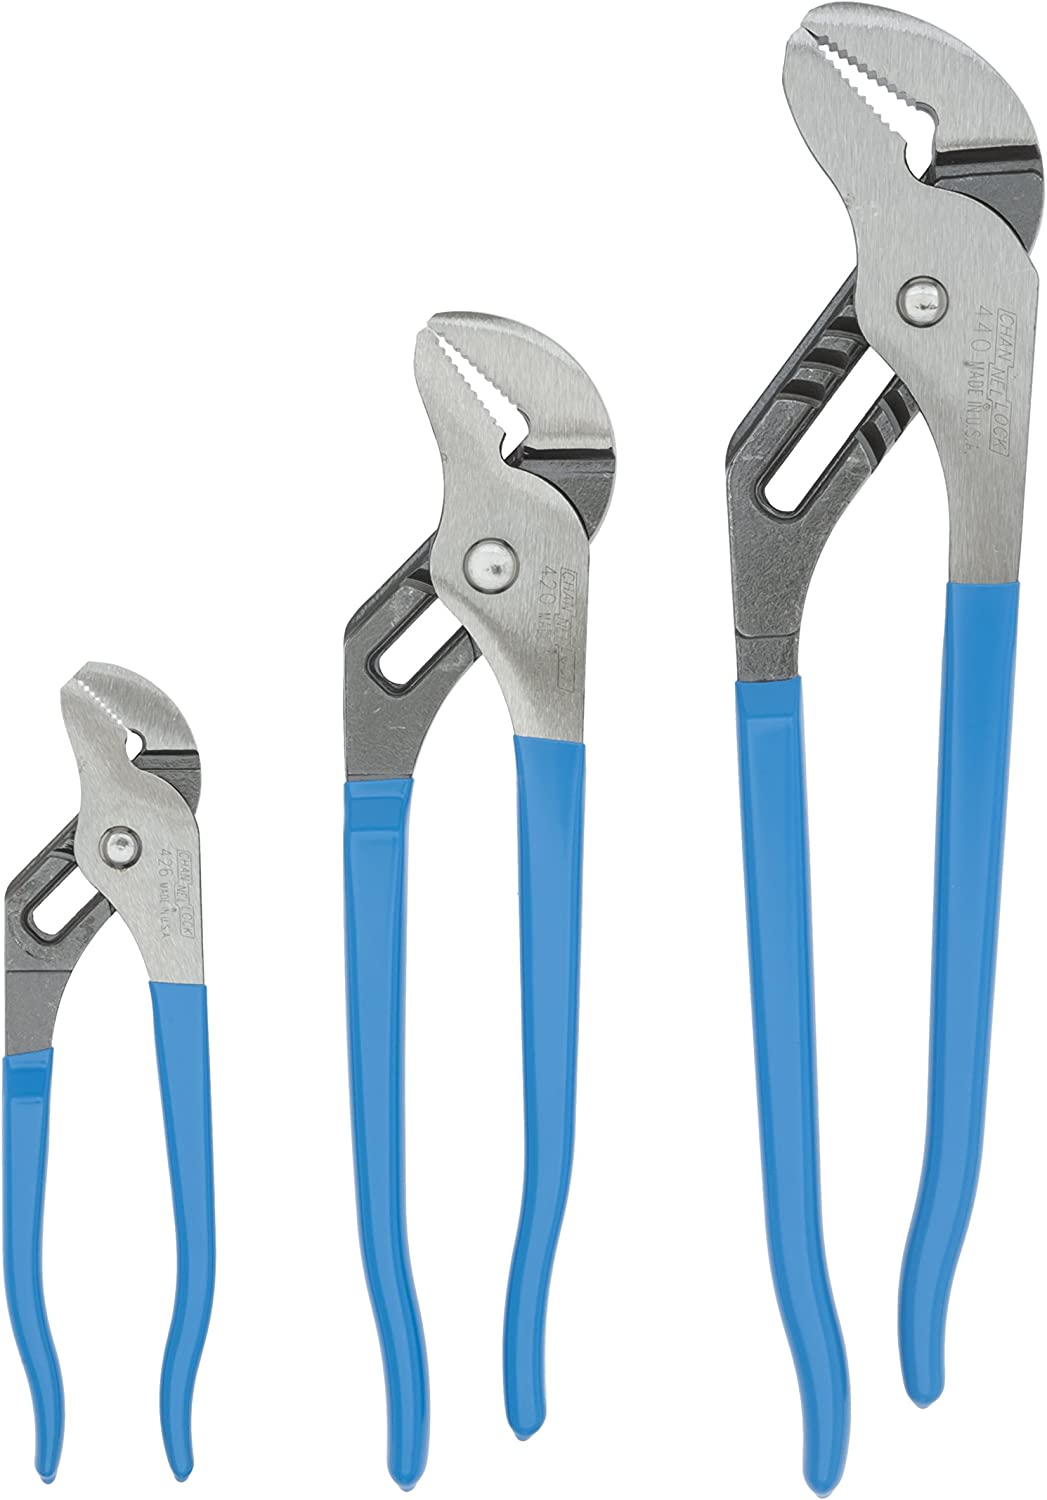 CHANNELLOCK 3 Pc. TONGUE & GROOVE SET 1